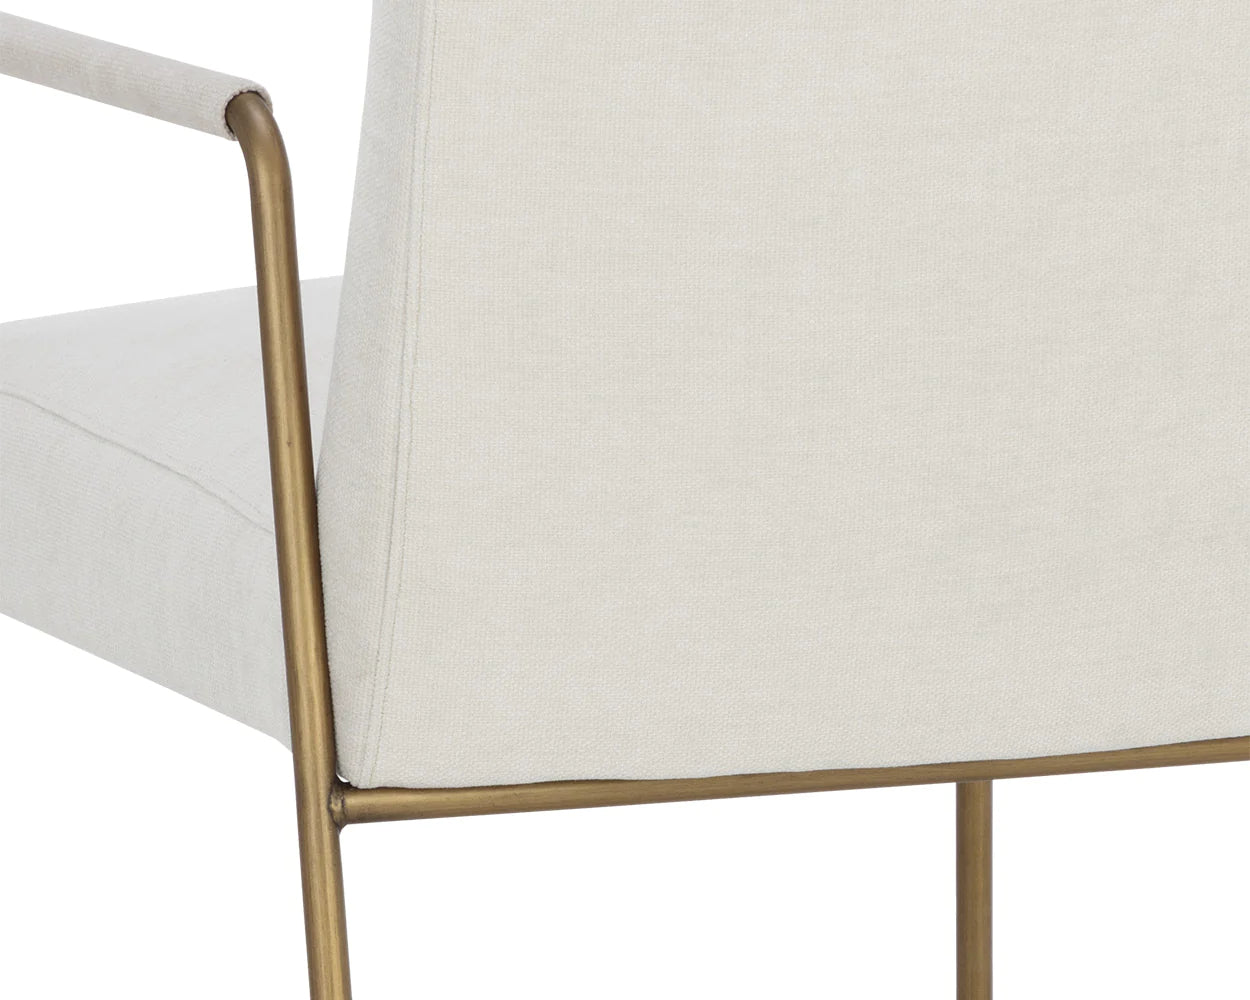 BALFORD DINING ARMCHAIR - DANNY IVORY